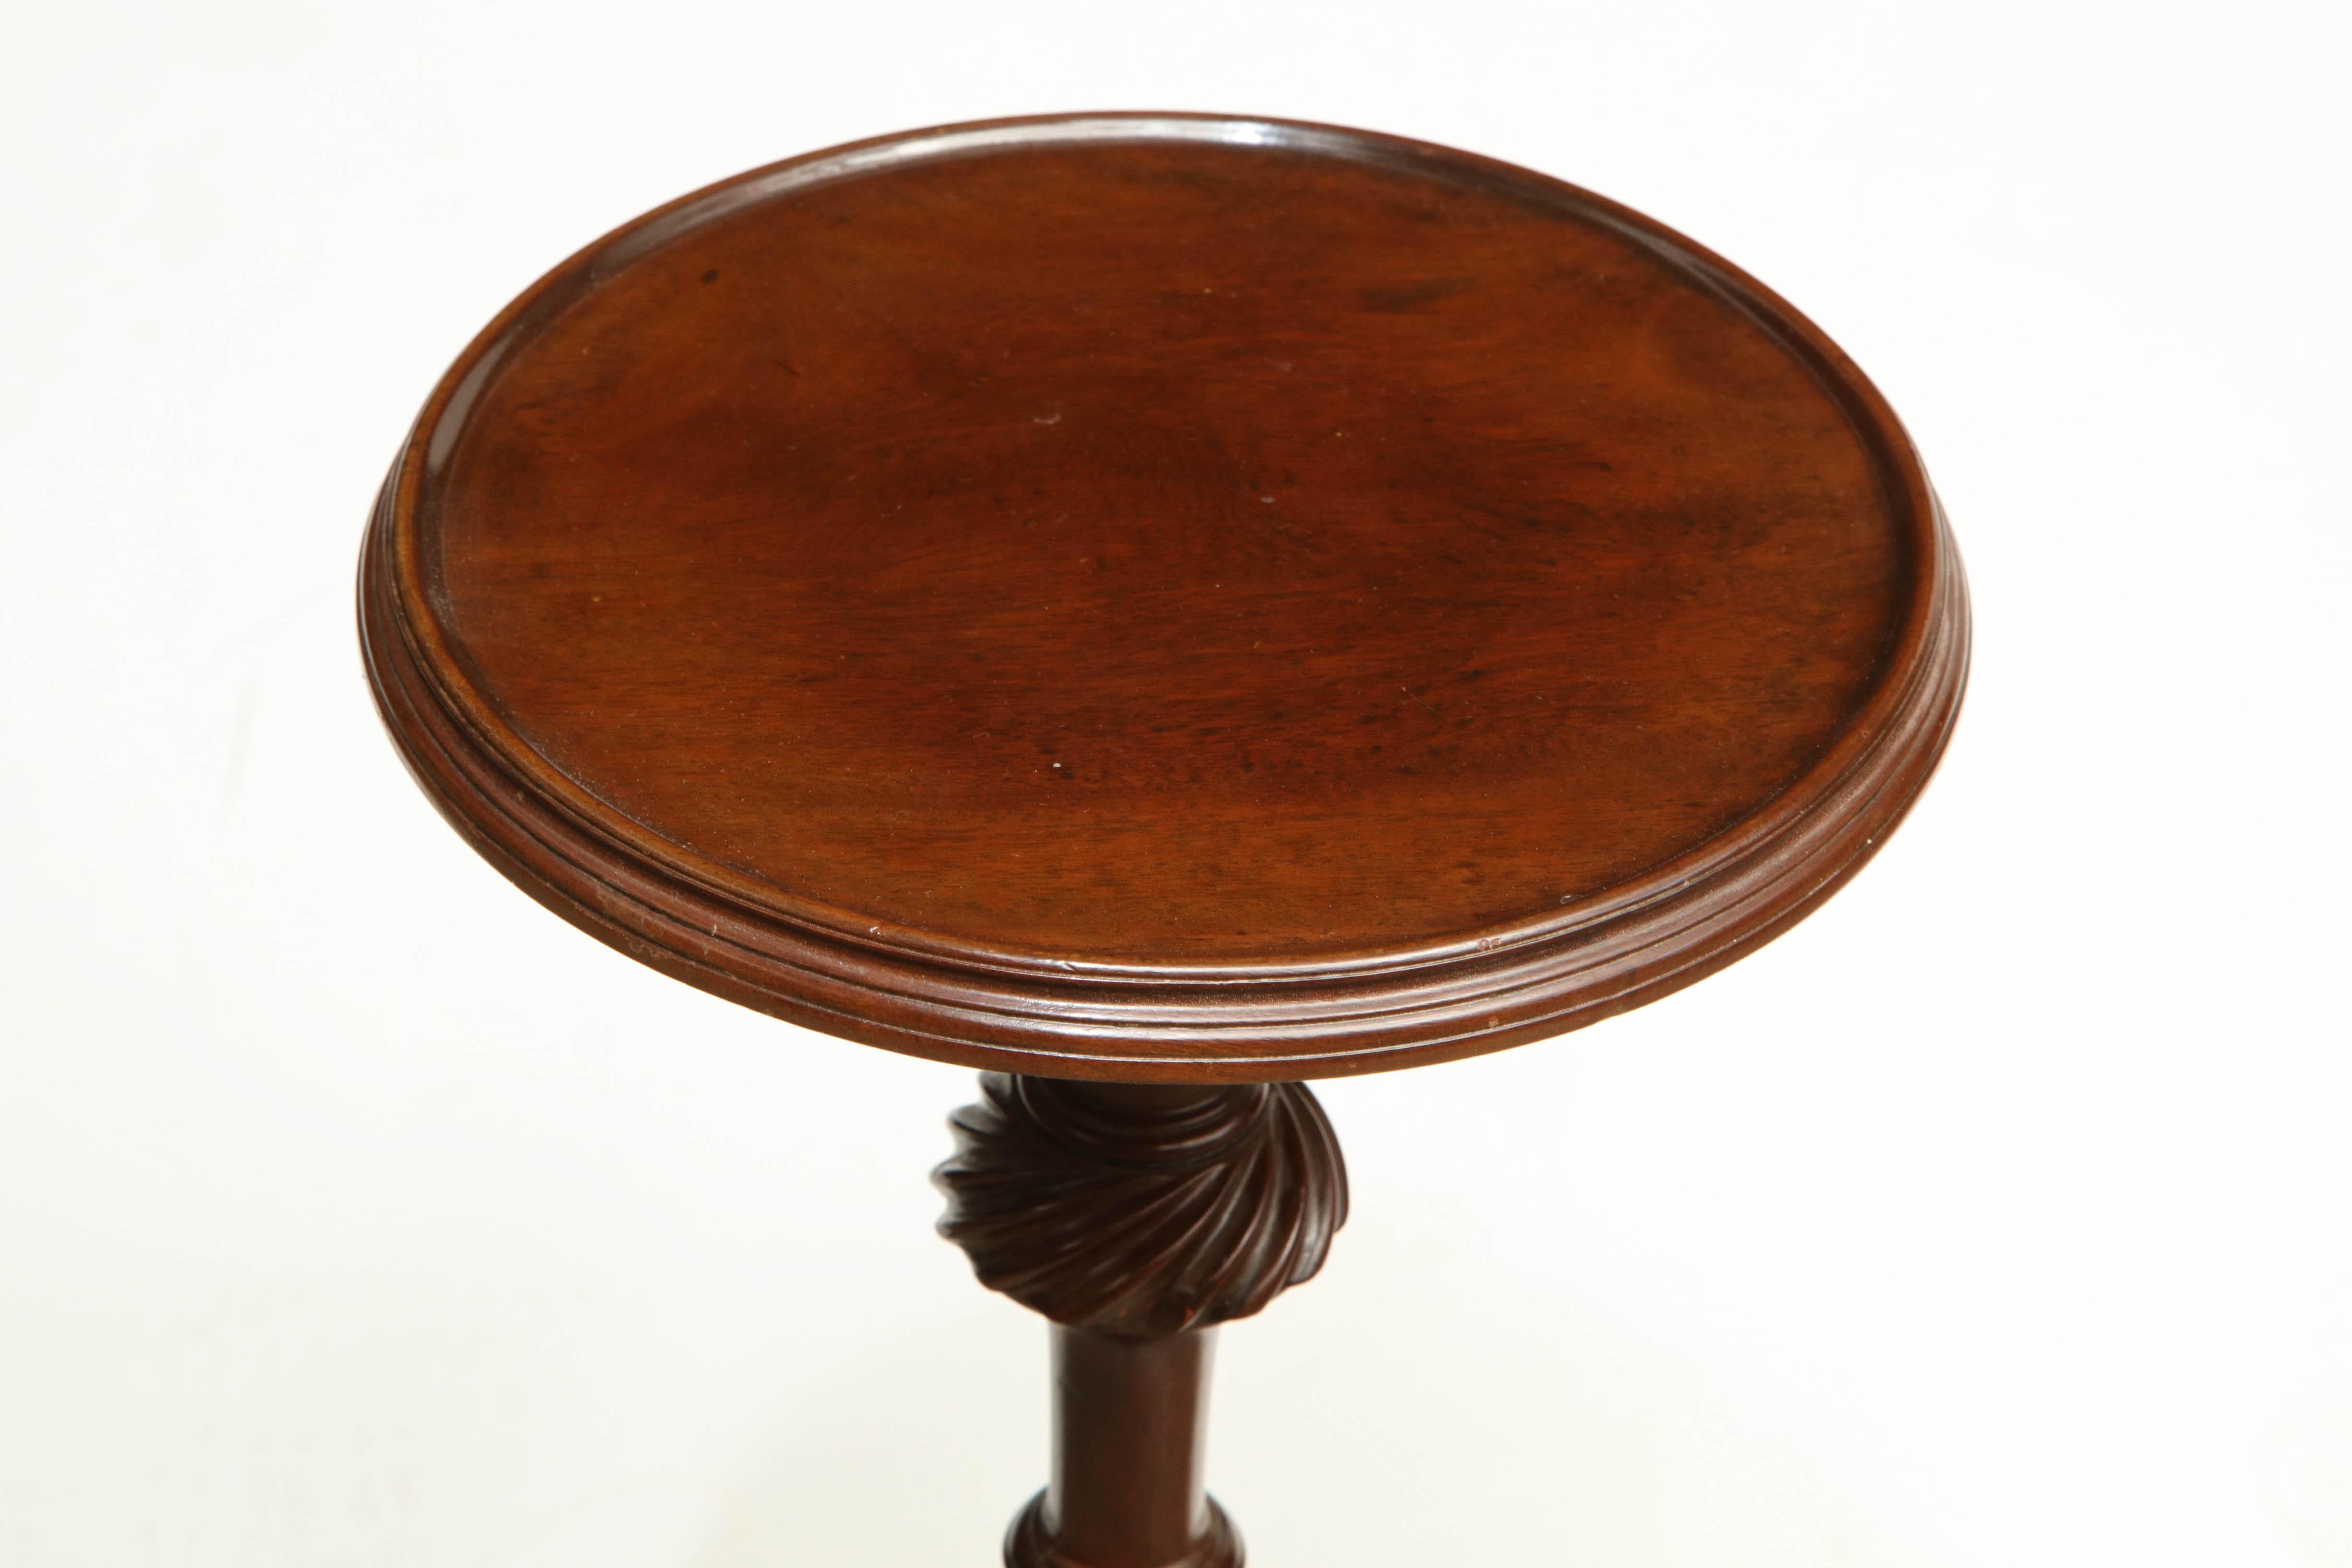 An English George II mahogany wine table with dished top and fluted urn form pedestal.